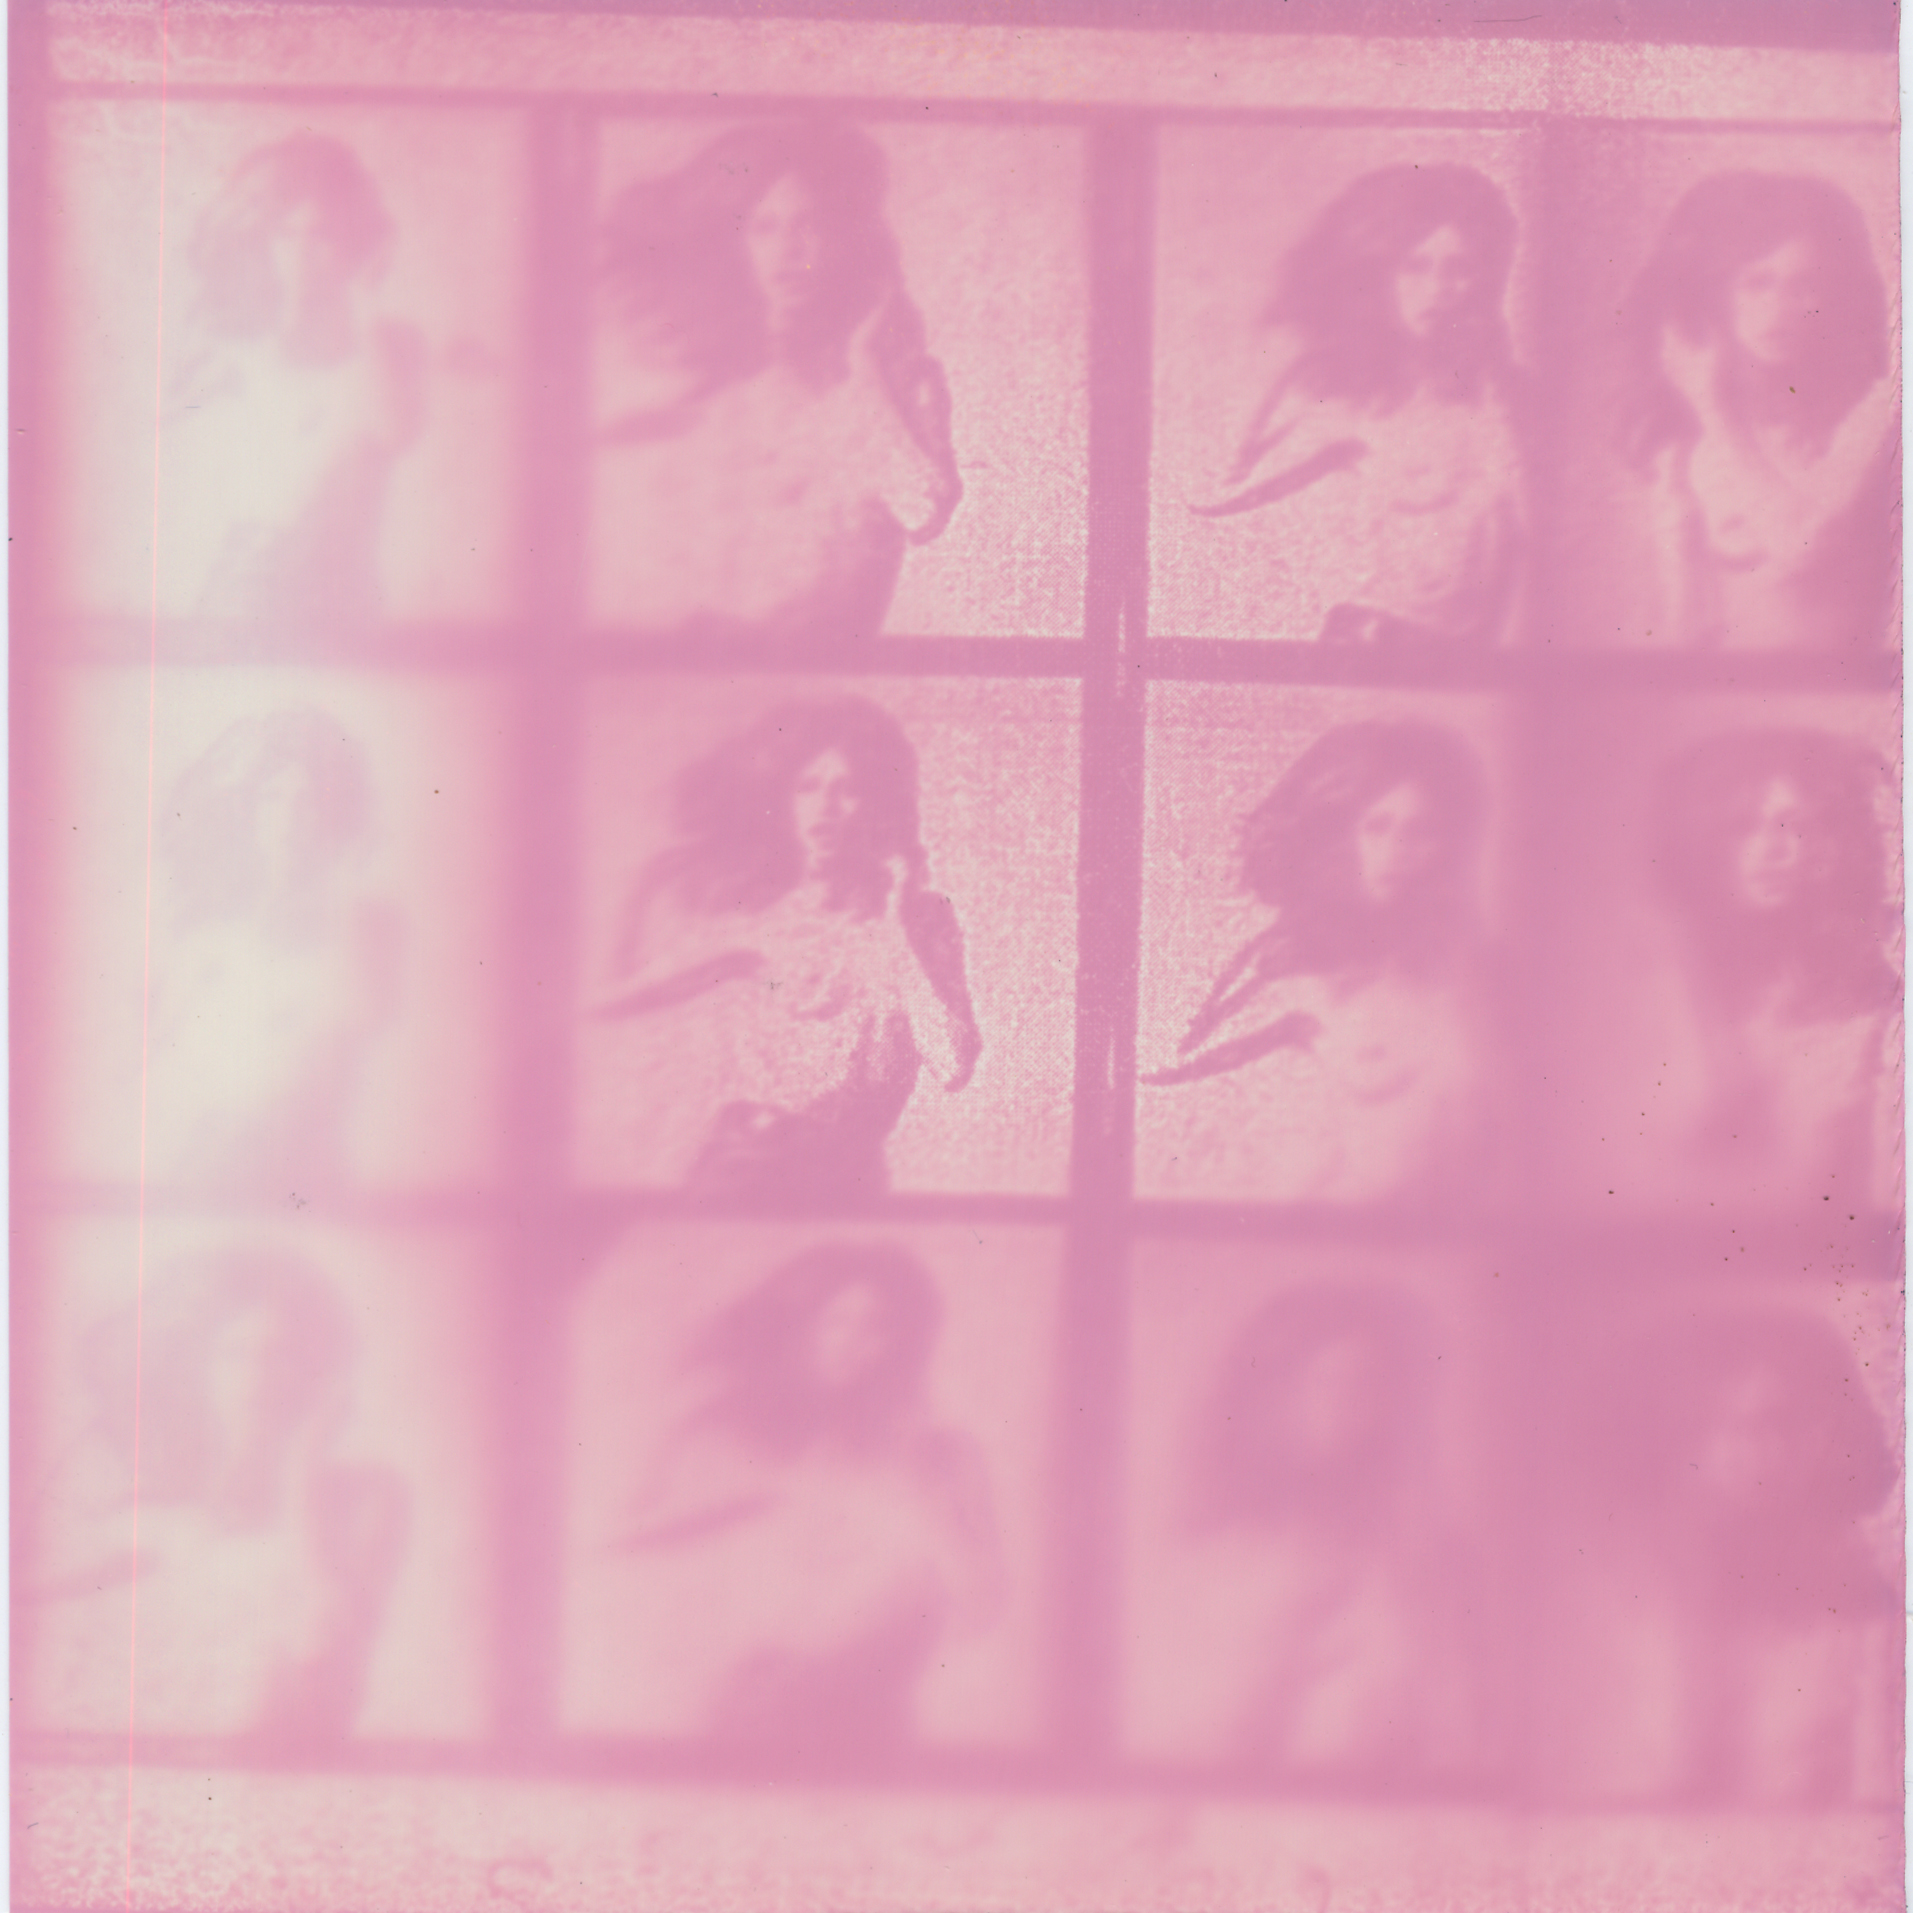   Lot 86 - WERNER BOKELBERG (b.1937) &nbsp;Uschi Obermaier, 1969 &nbsp;oversized gelatin silver contact sheet, comprising 12 images, printed 2007 signed and numbered '3/10' in ink on recto &nbsp;48 x 66in. (122 x 168cm.)&nbsp;   A series of bootleg p